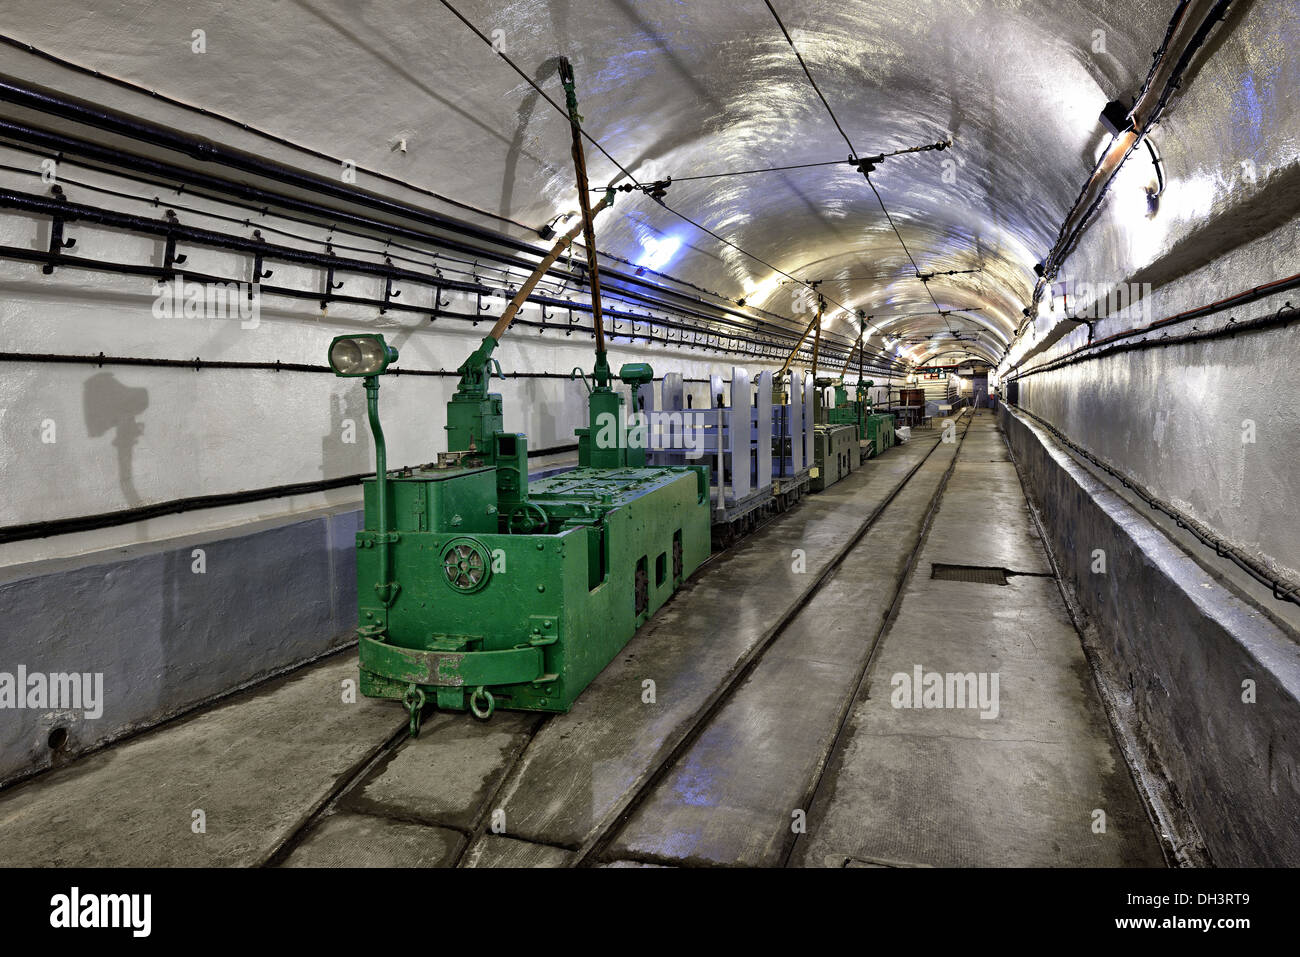 Electric train, Schoenenbourg fortress, Maginot line. Stock Photo